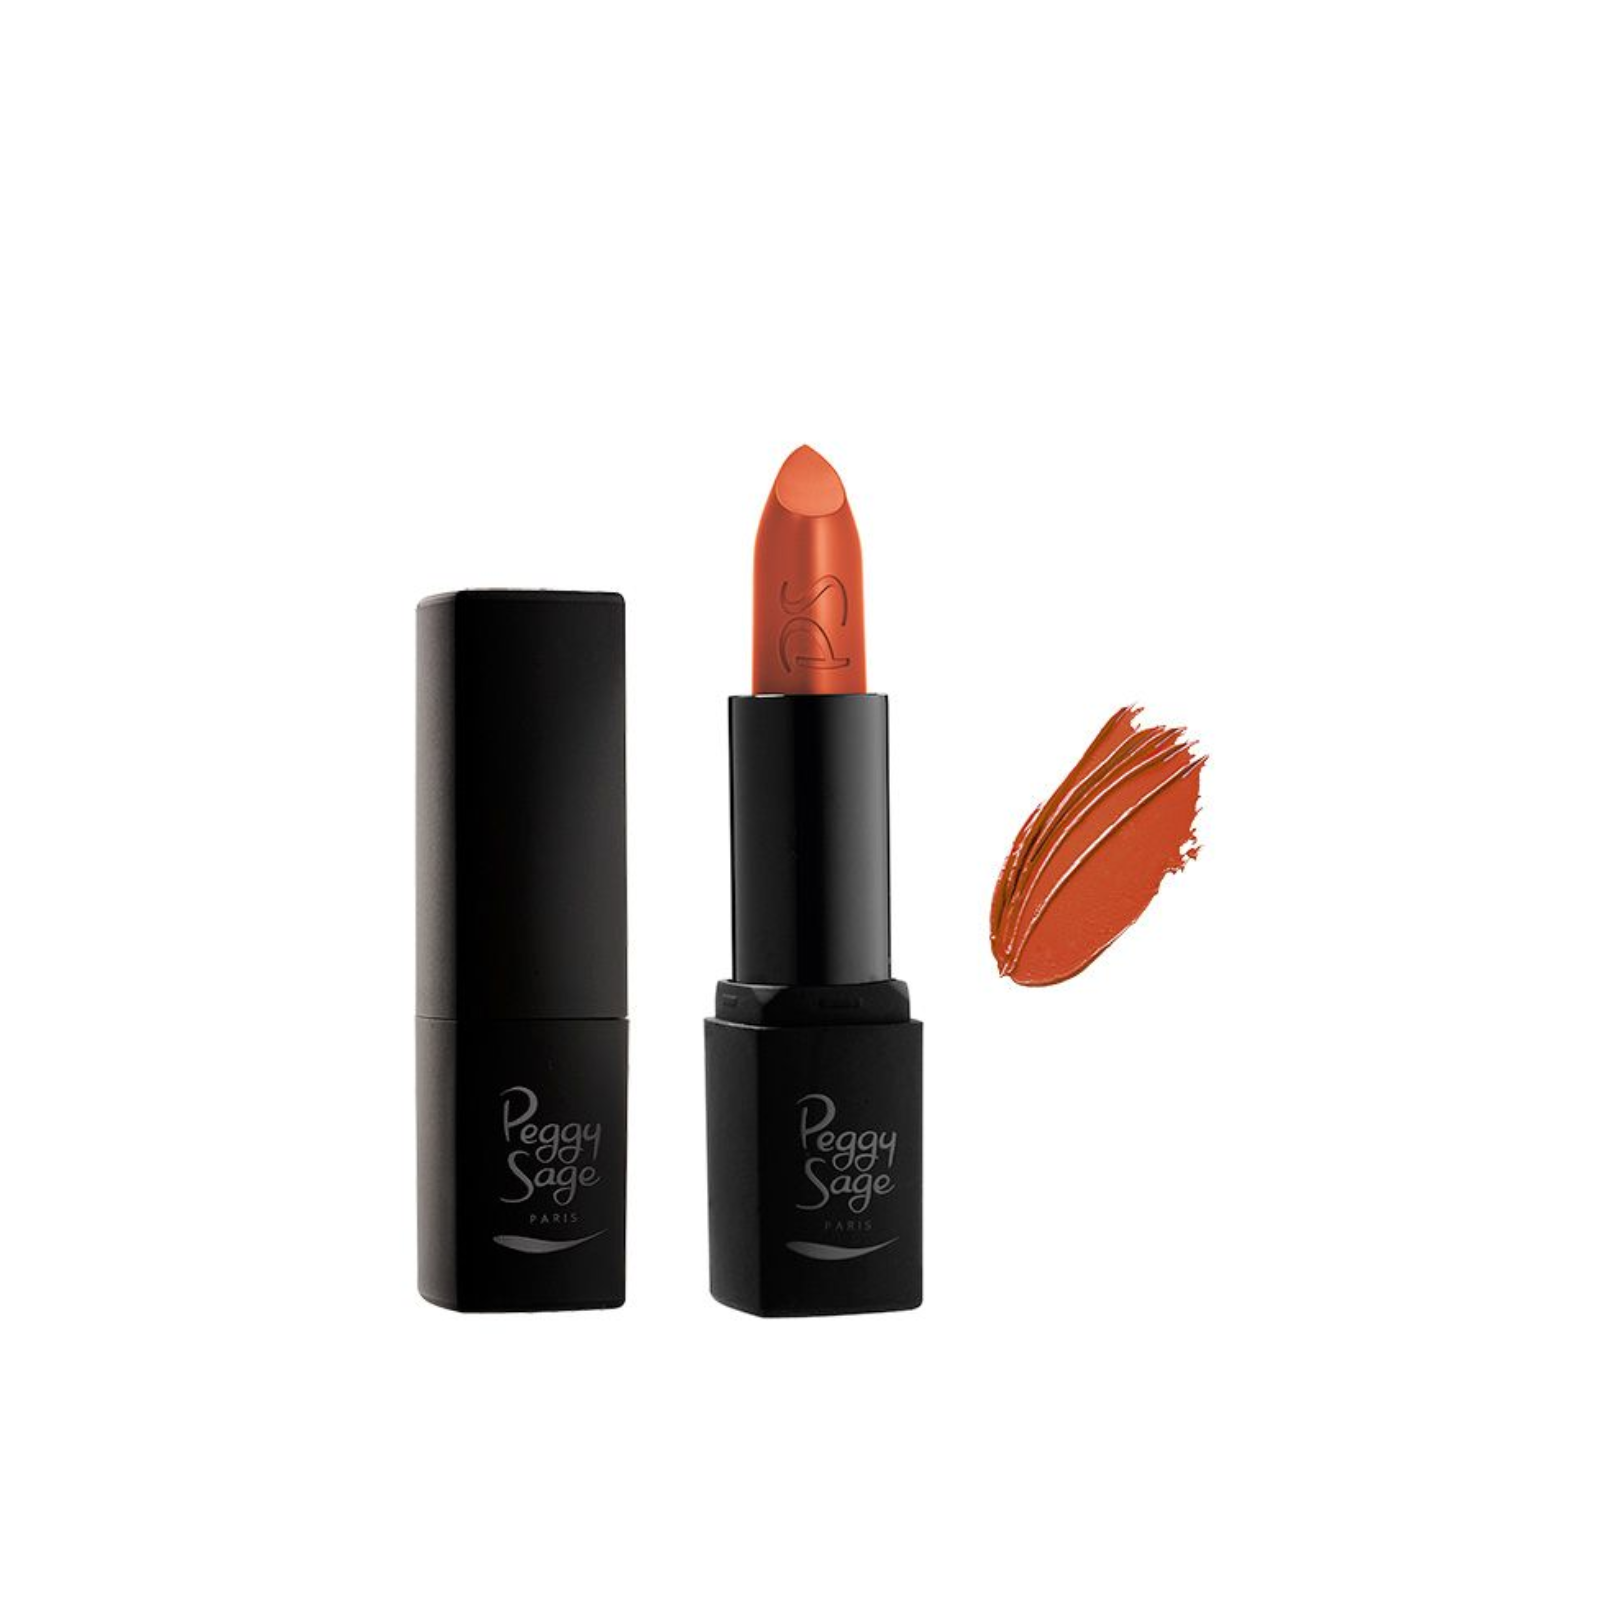 PEGGY SAGE 000966 TESTER ROSSETTO 3.8GR CORAIL 066